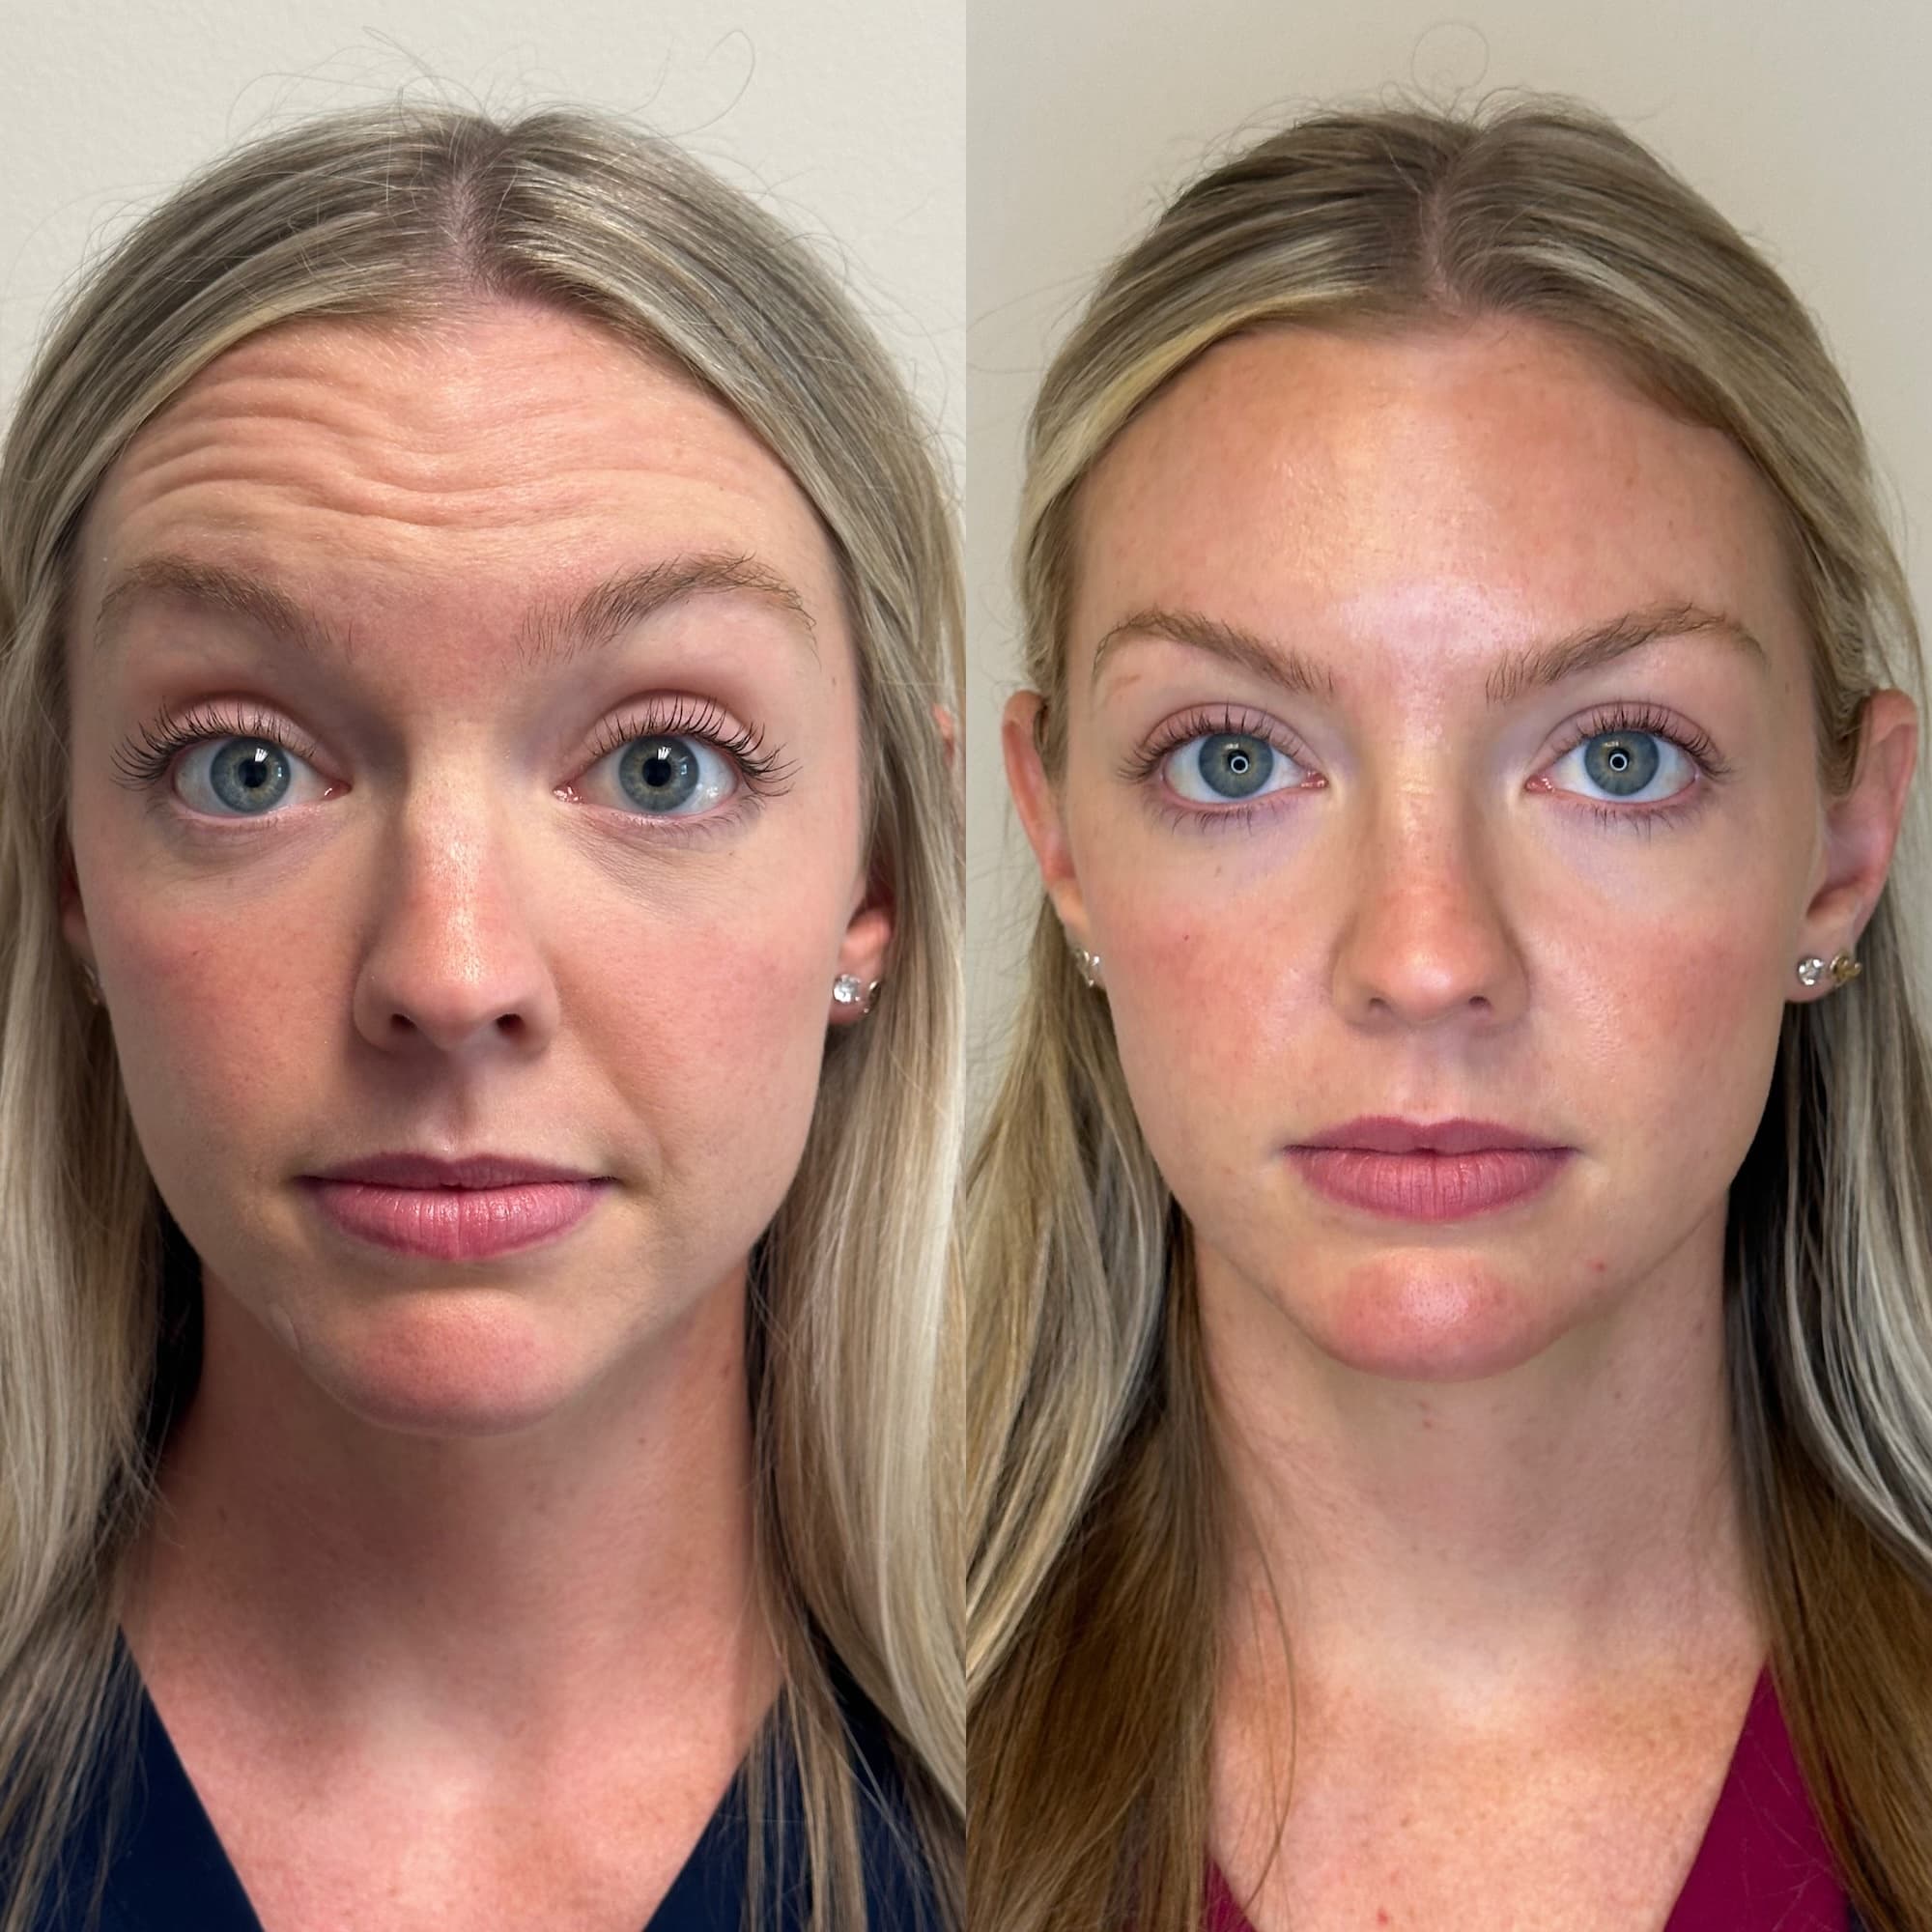 Woman's face front view before and after showing results of Dysport - fewer forehead wrinkles with raised eyebrows